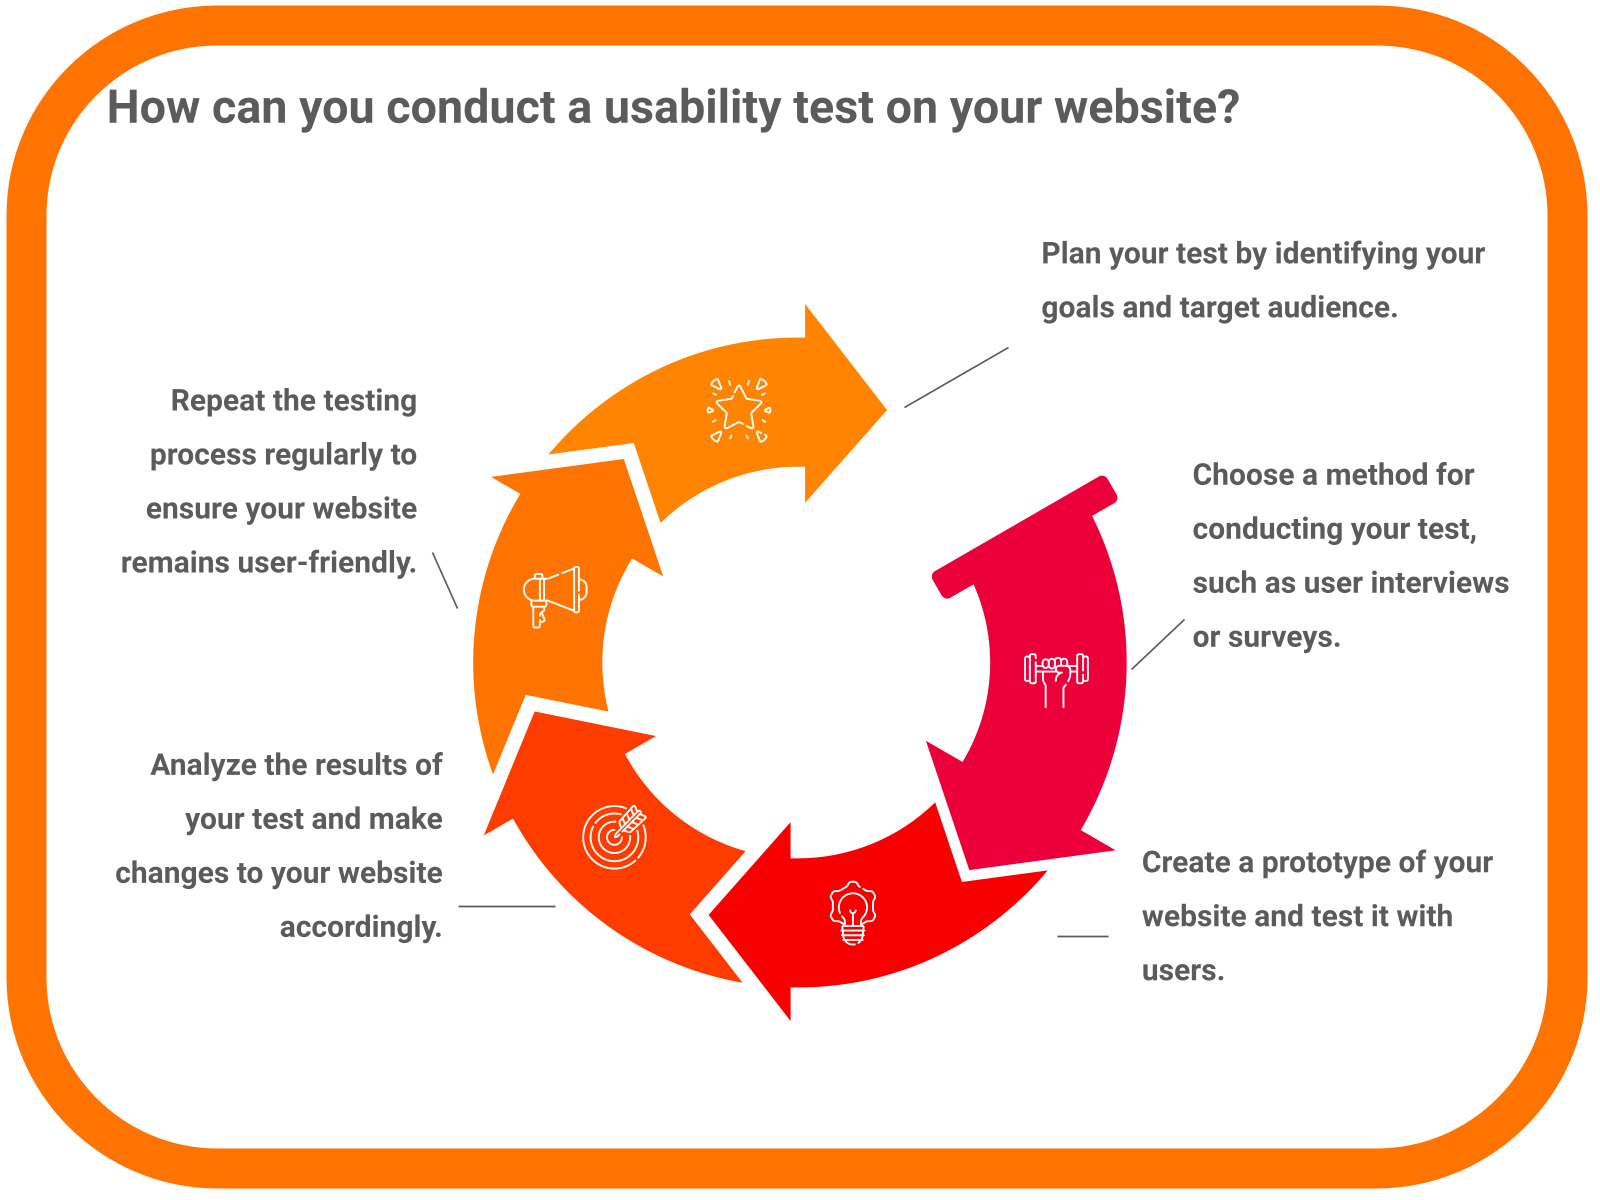 How can you conduct a usability test on your website?